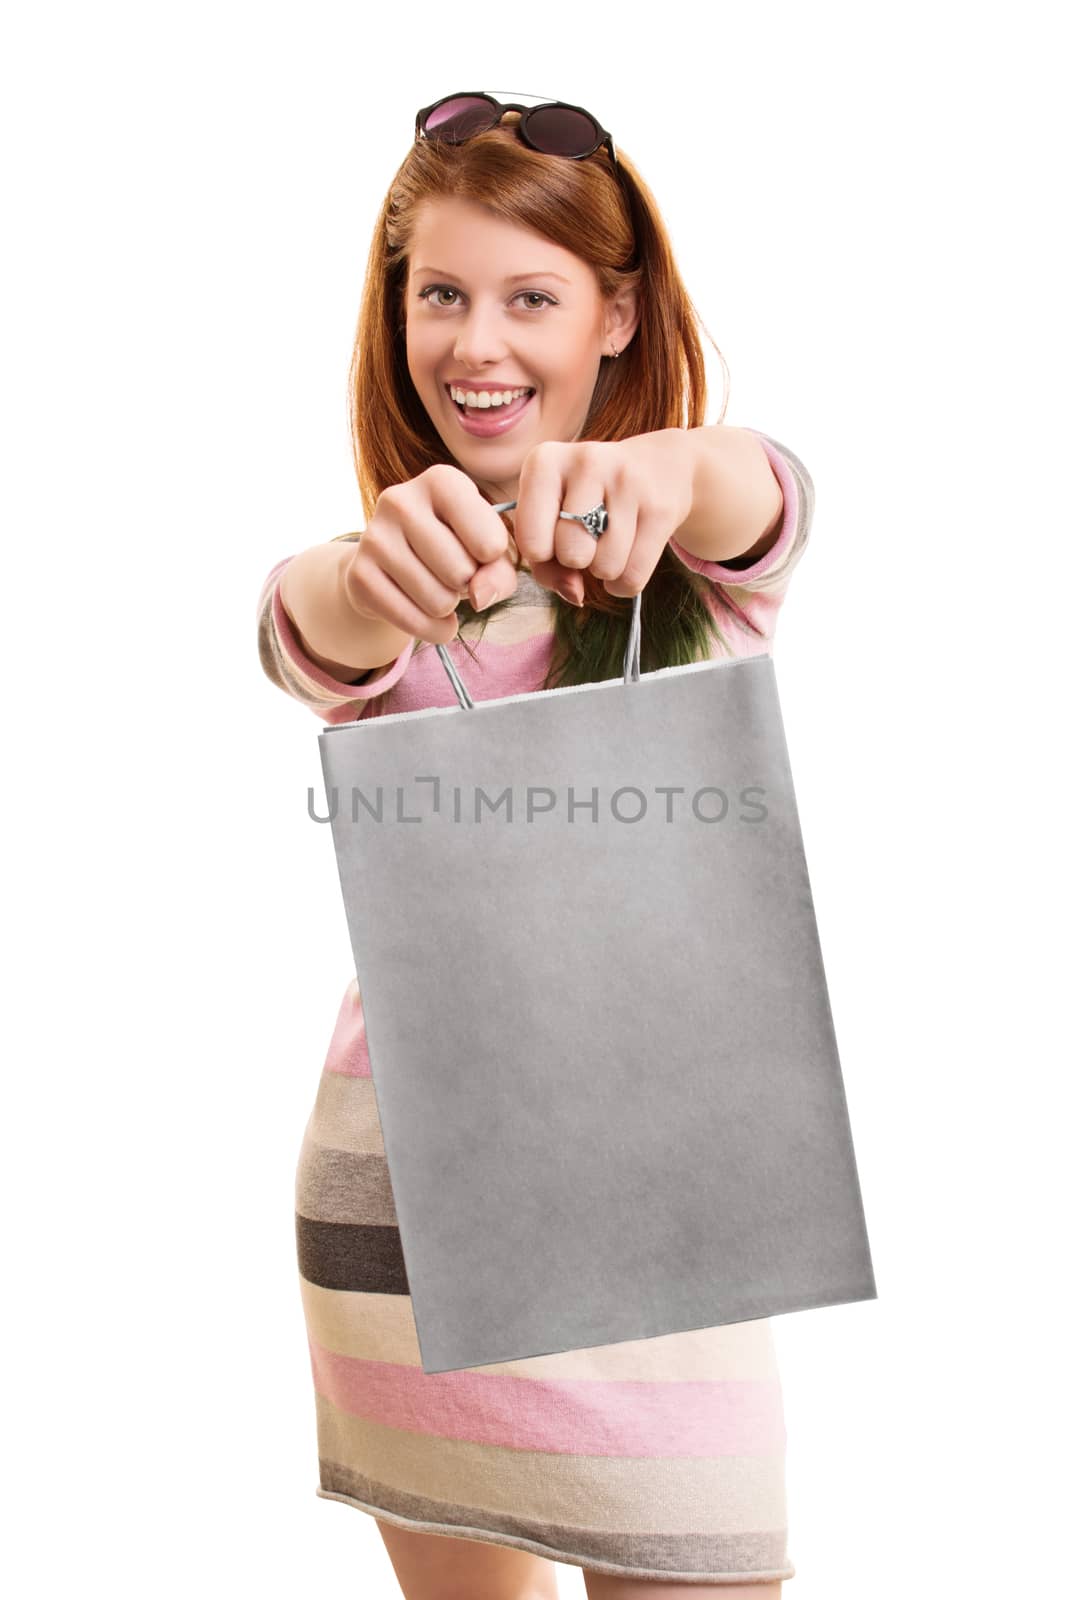 Smiling beautiful girl holding a shopping bag by Mendelex